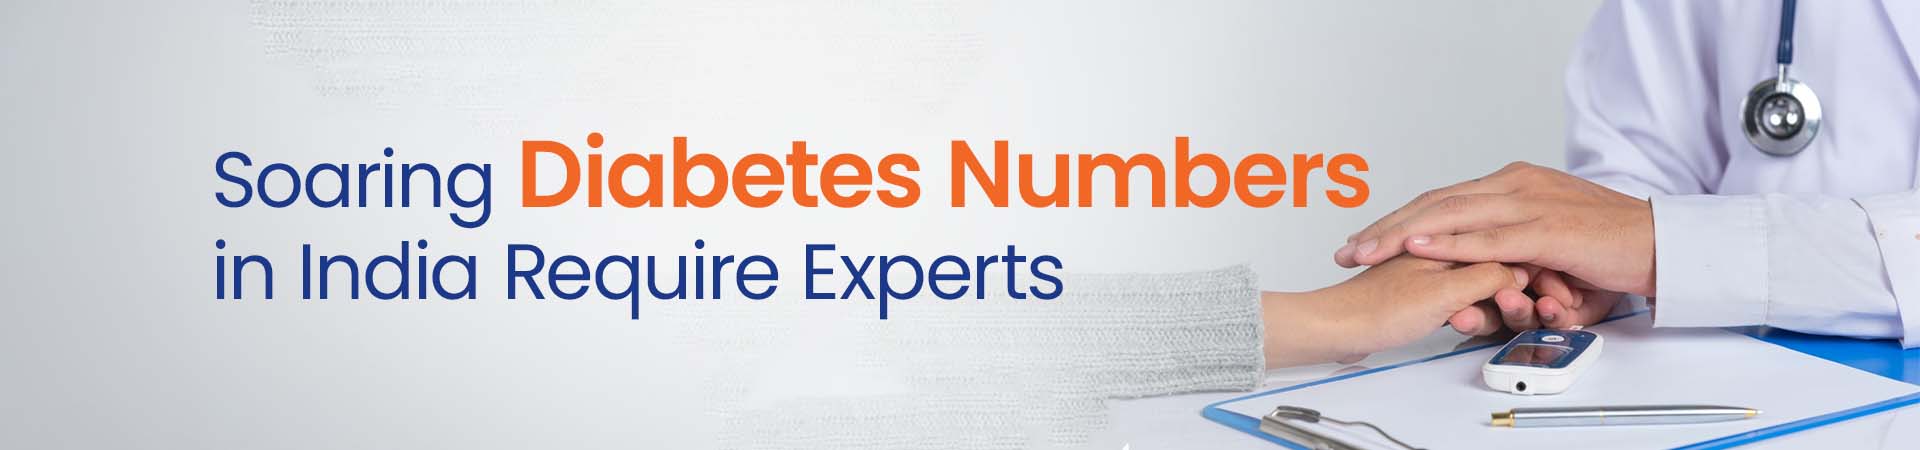 The blog showcases an image underscoring the escalating numbers of diabetes in India, underscoring the urgent need for experts in the field.